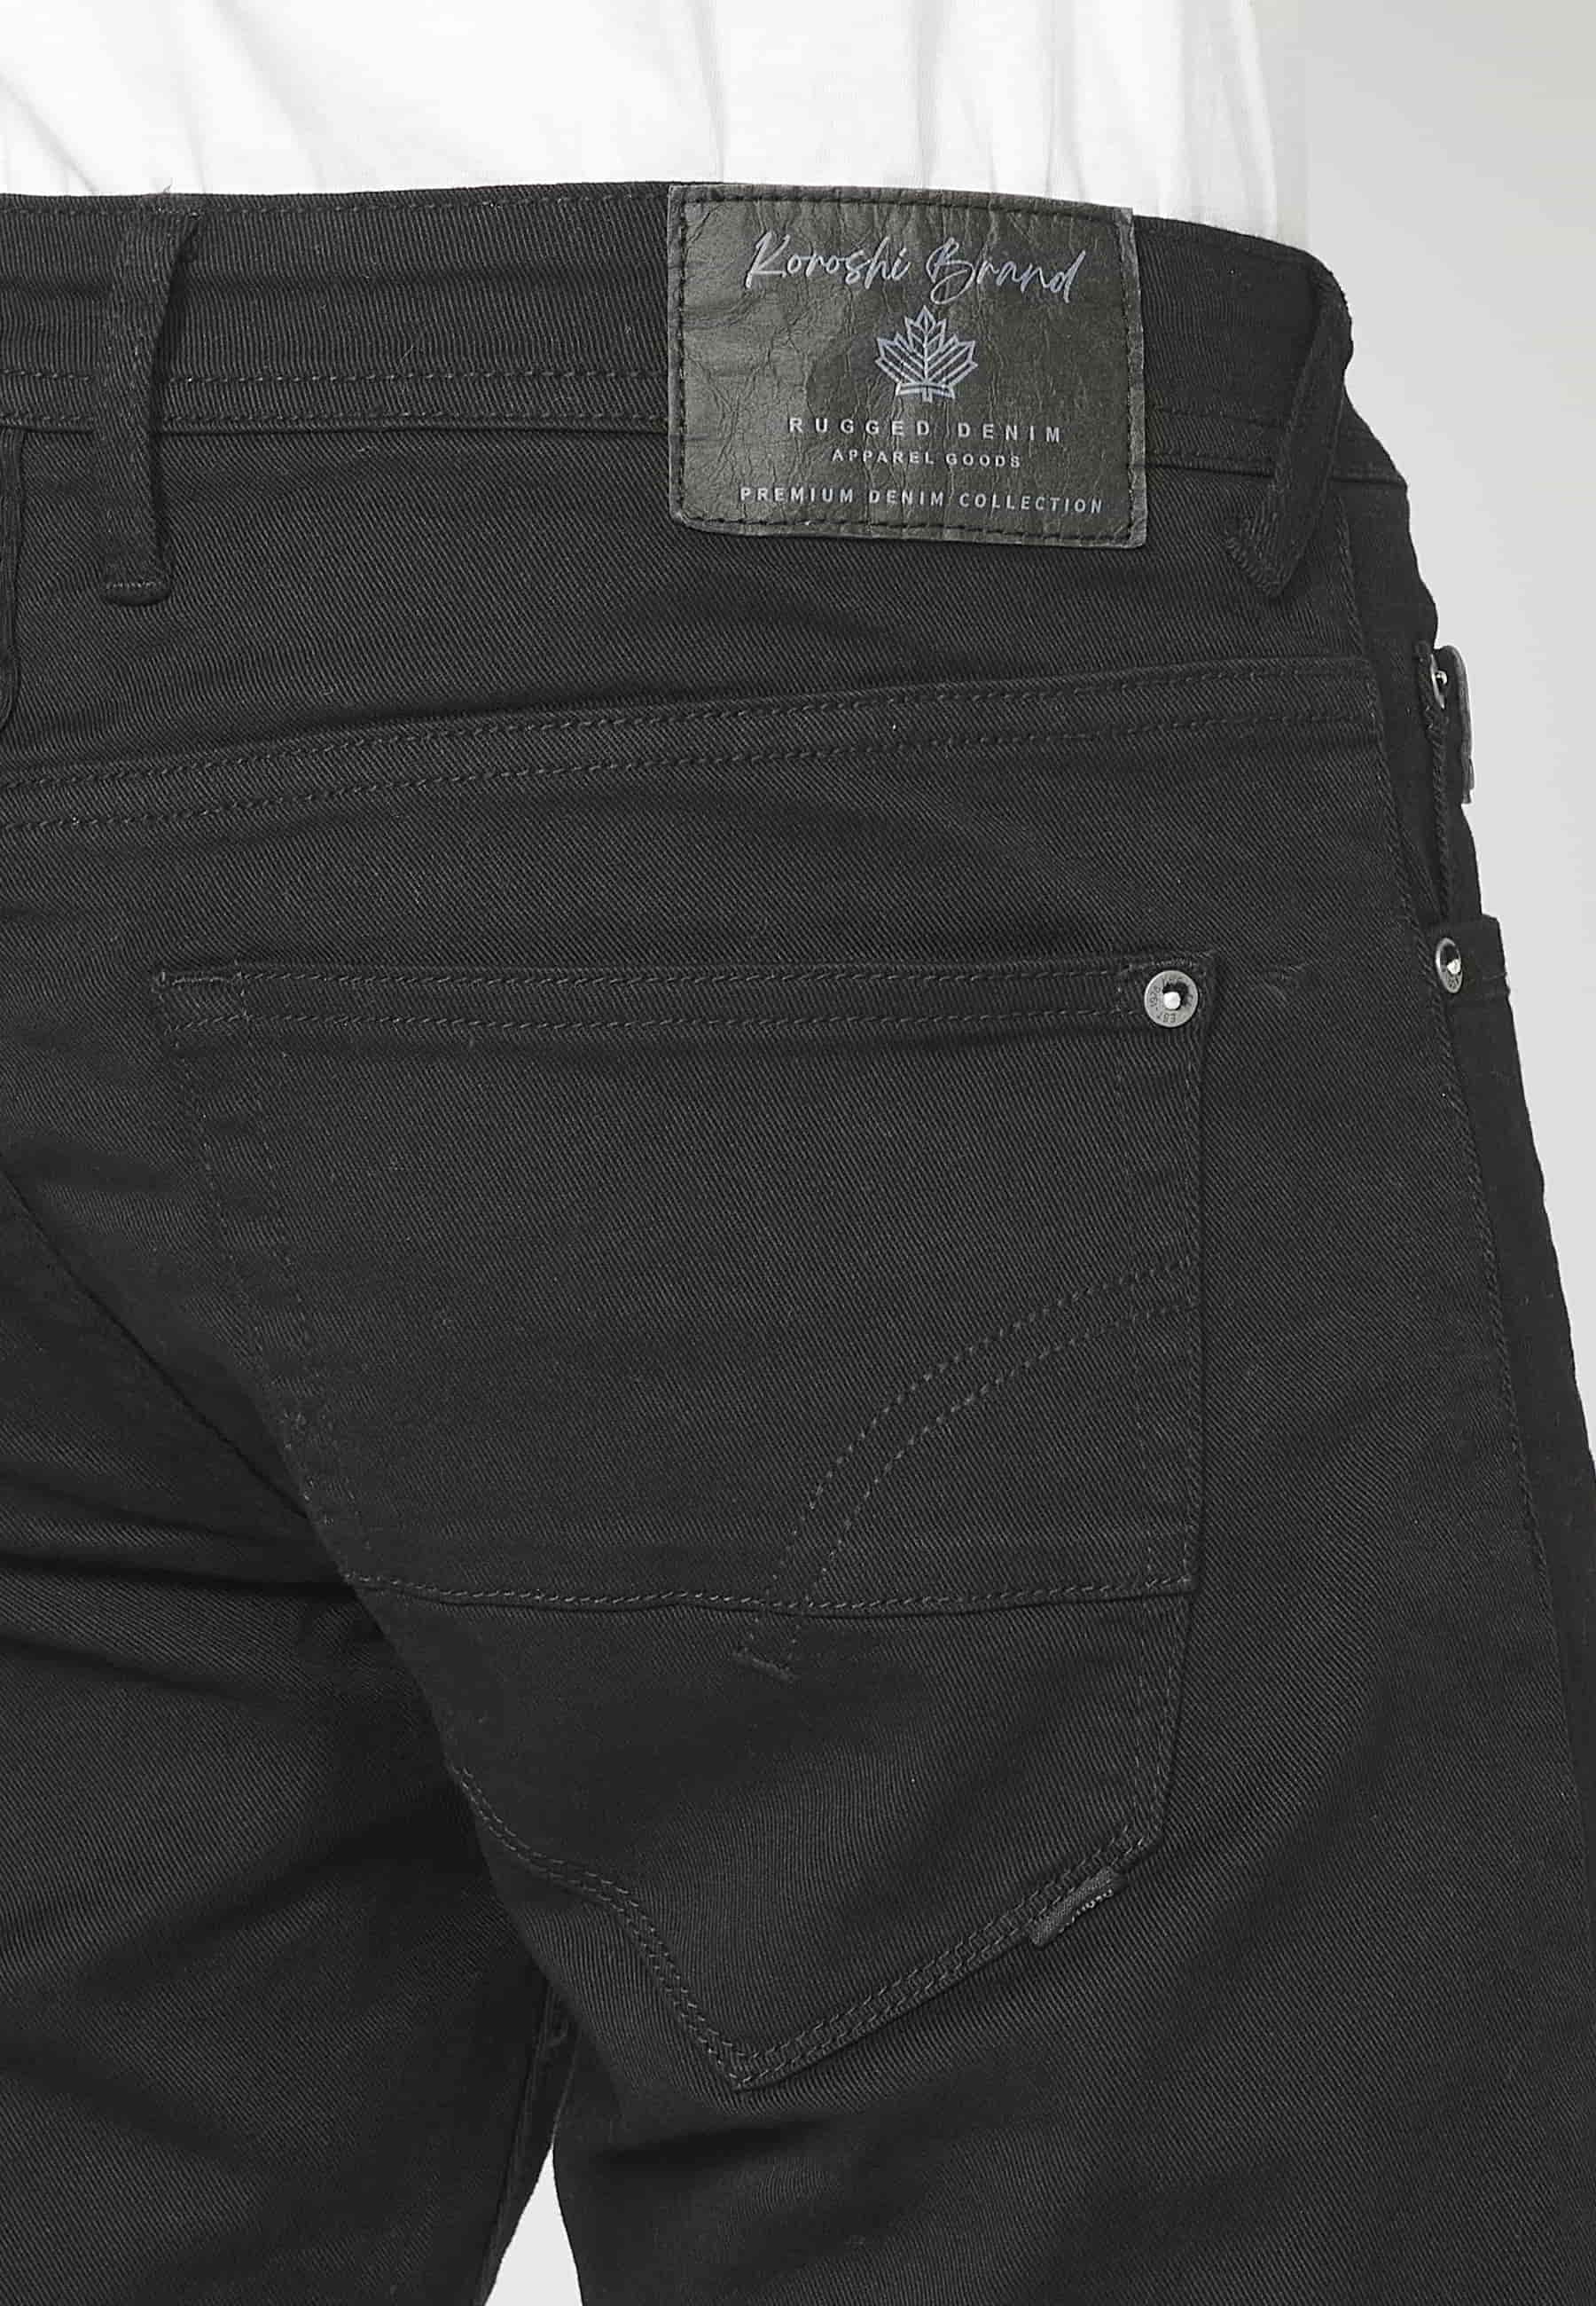 Long stretch regular fit trousers, with five pockets, Black color, for Men